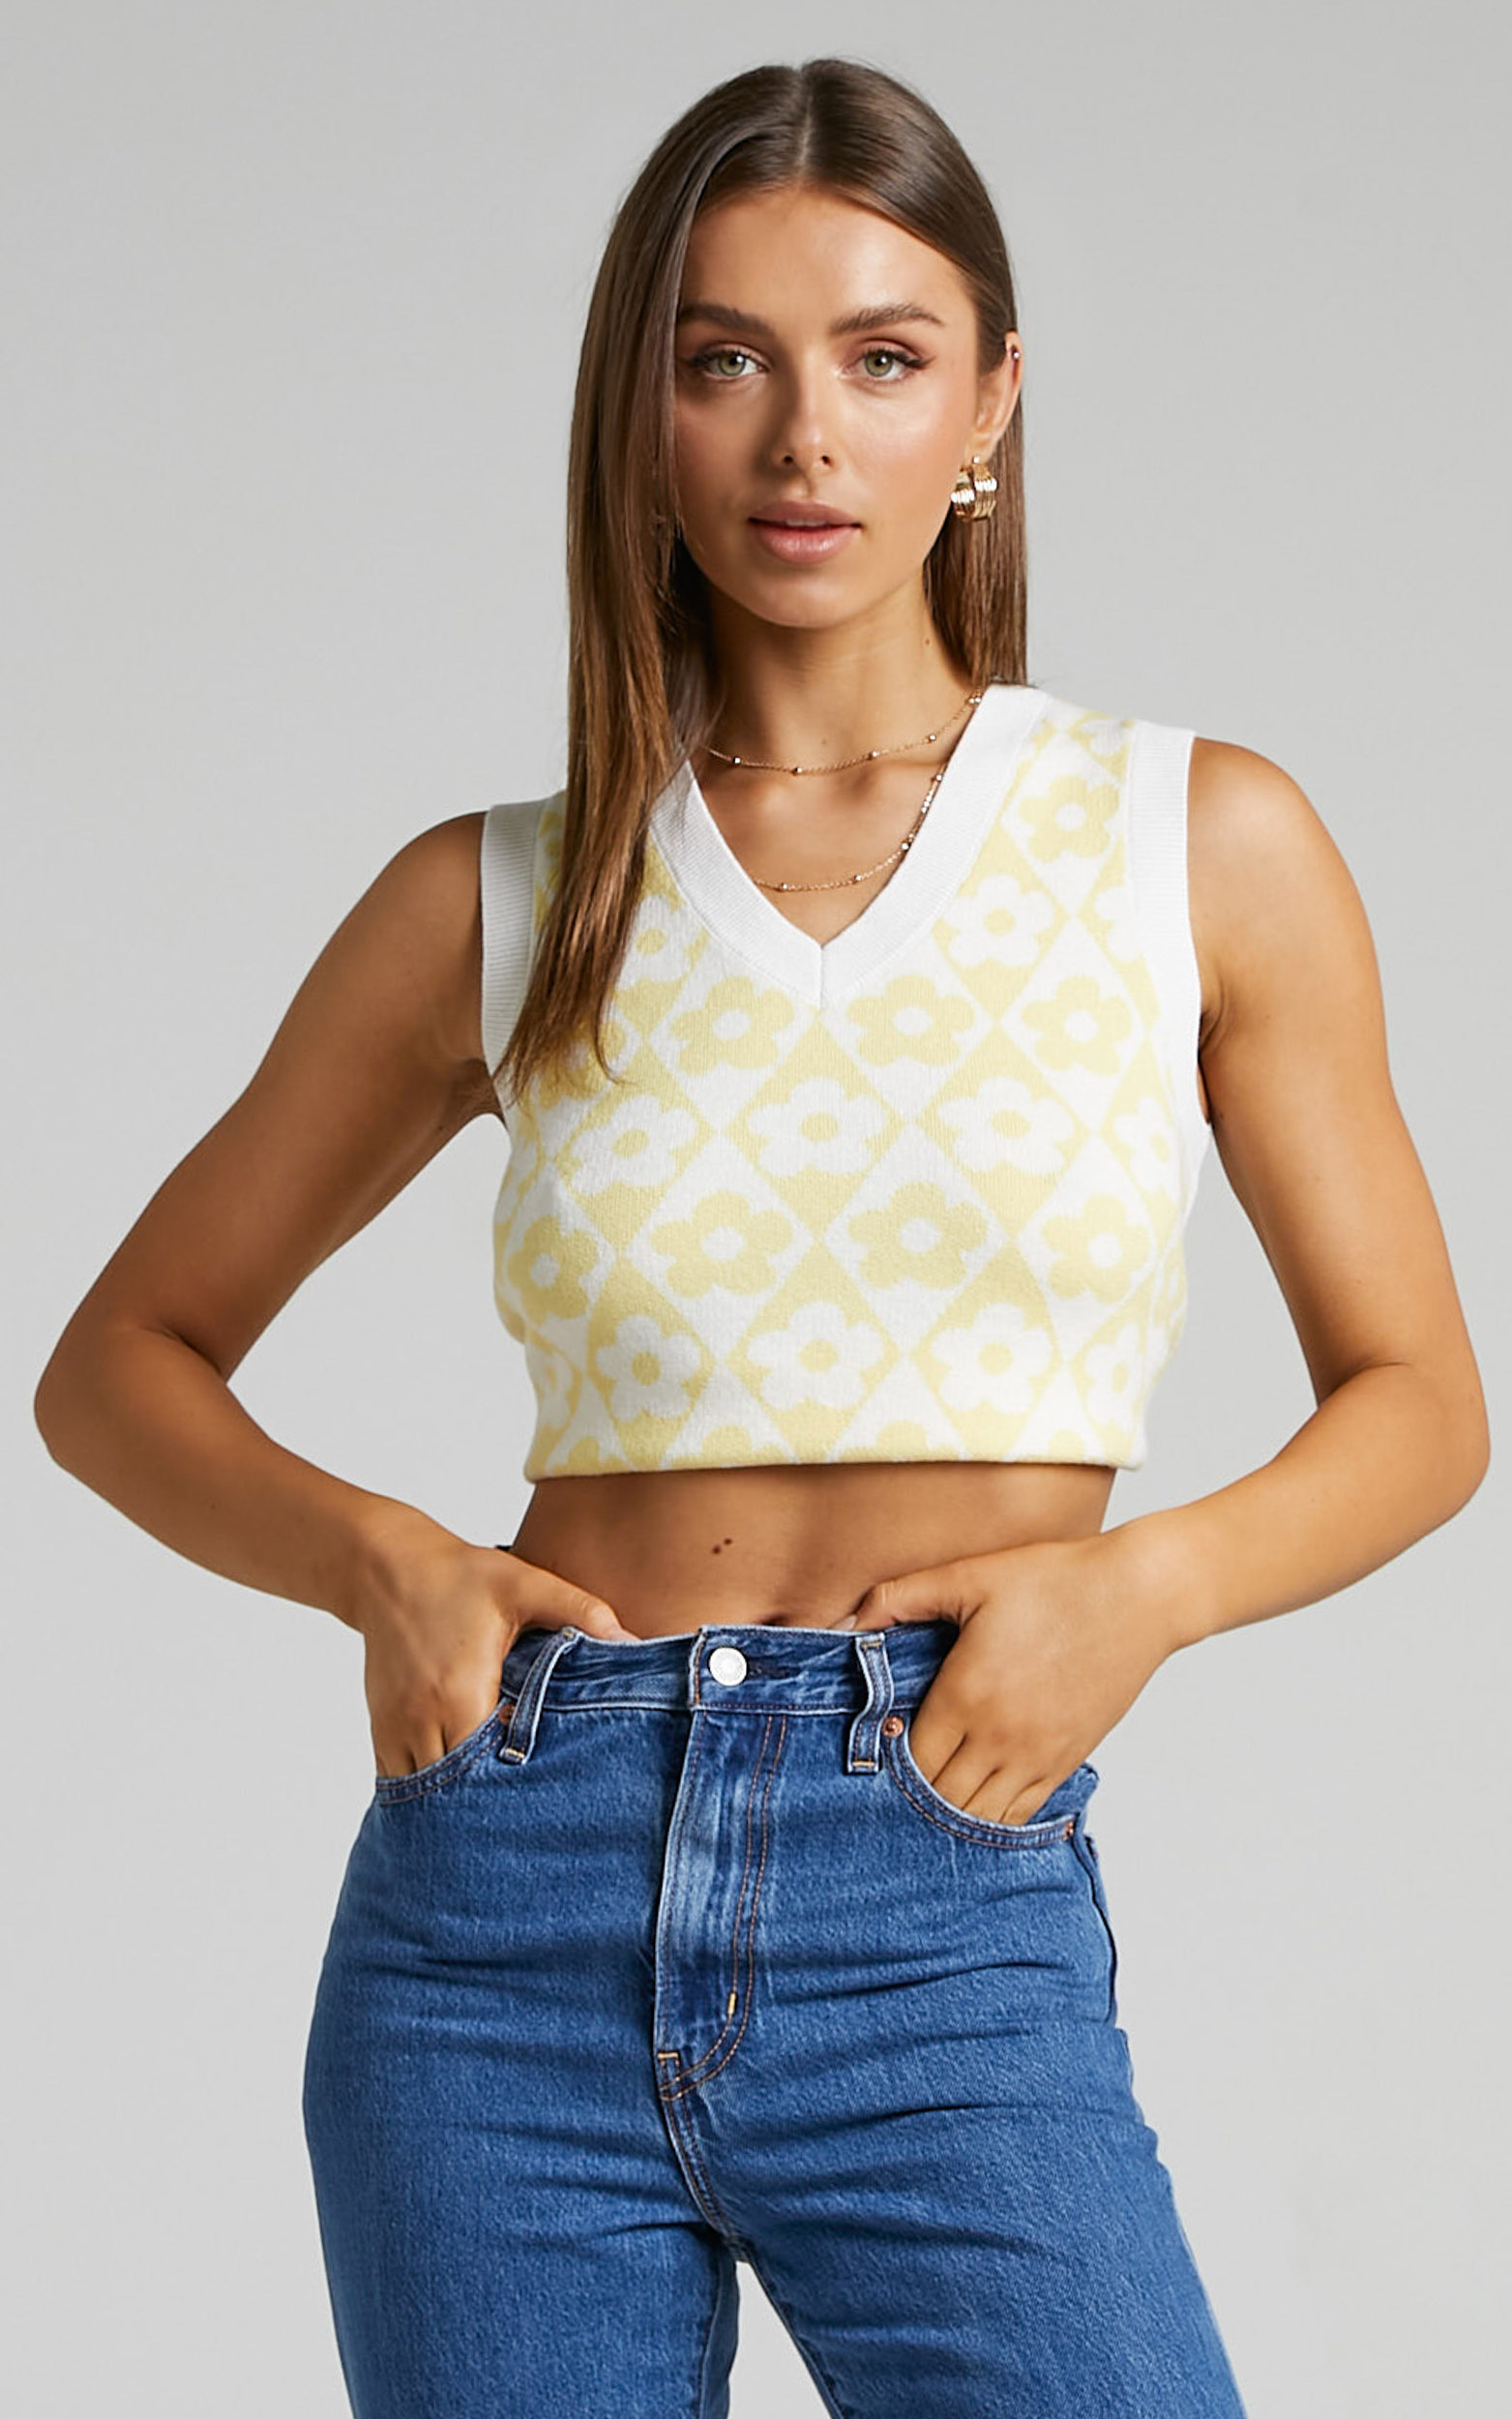 Levi's - Shelly Sweater Vest in Daisy - L, CRE1, hi-res image number null